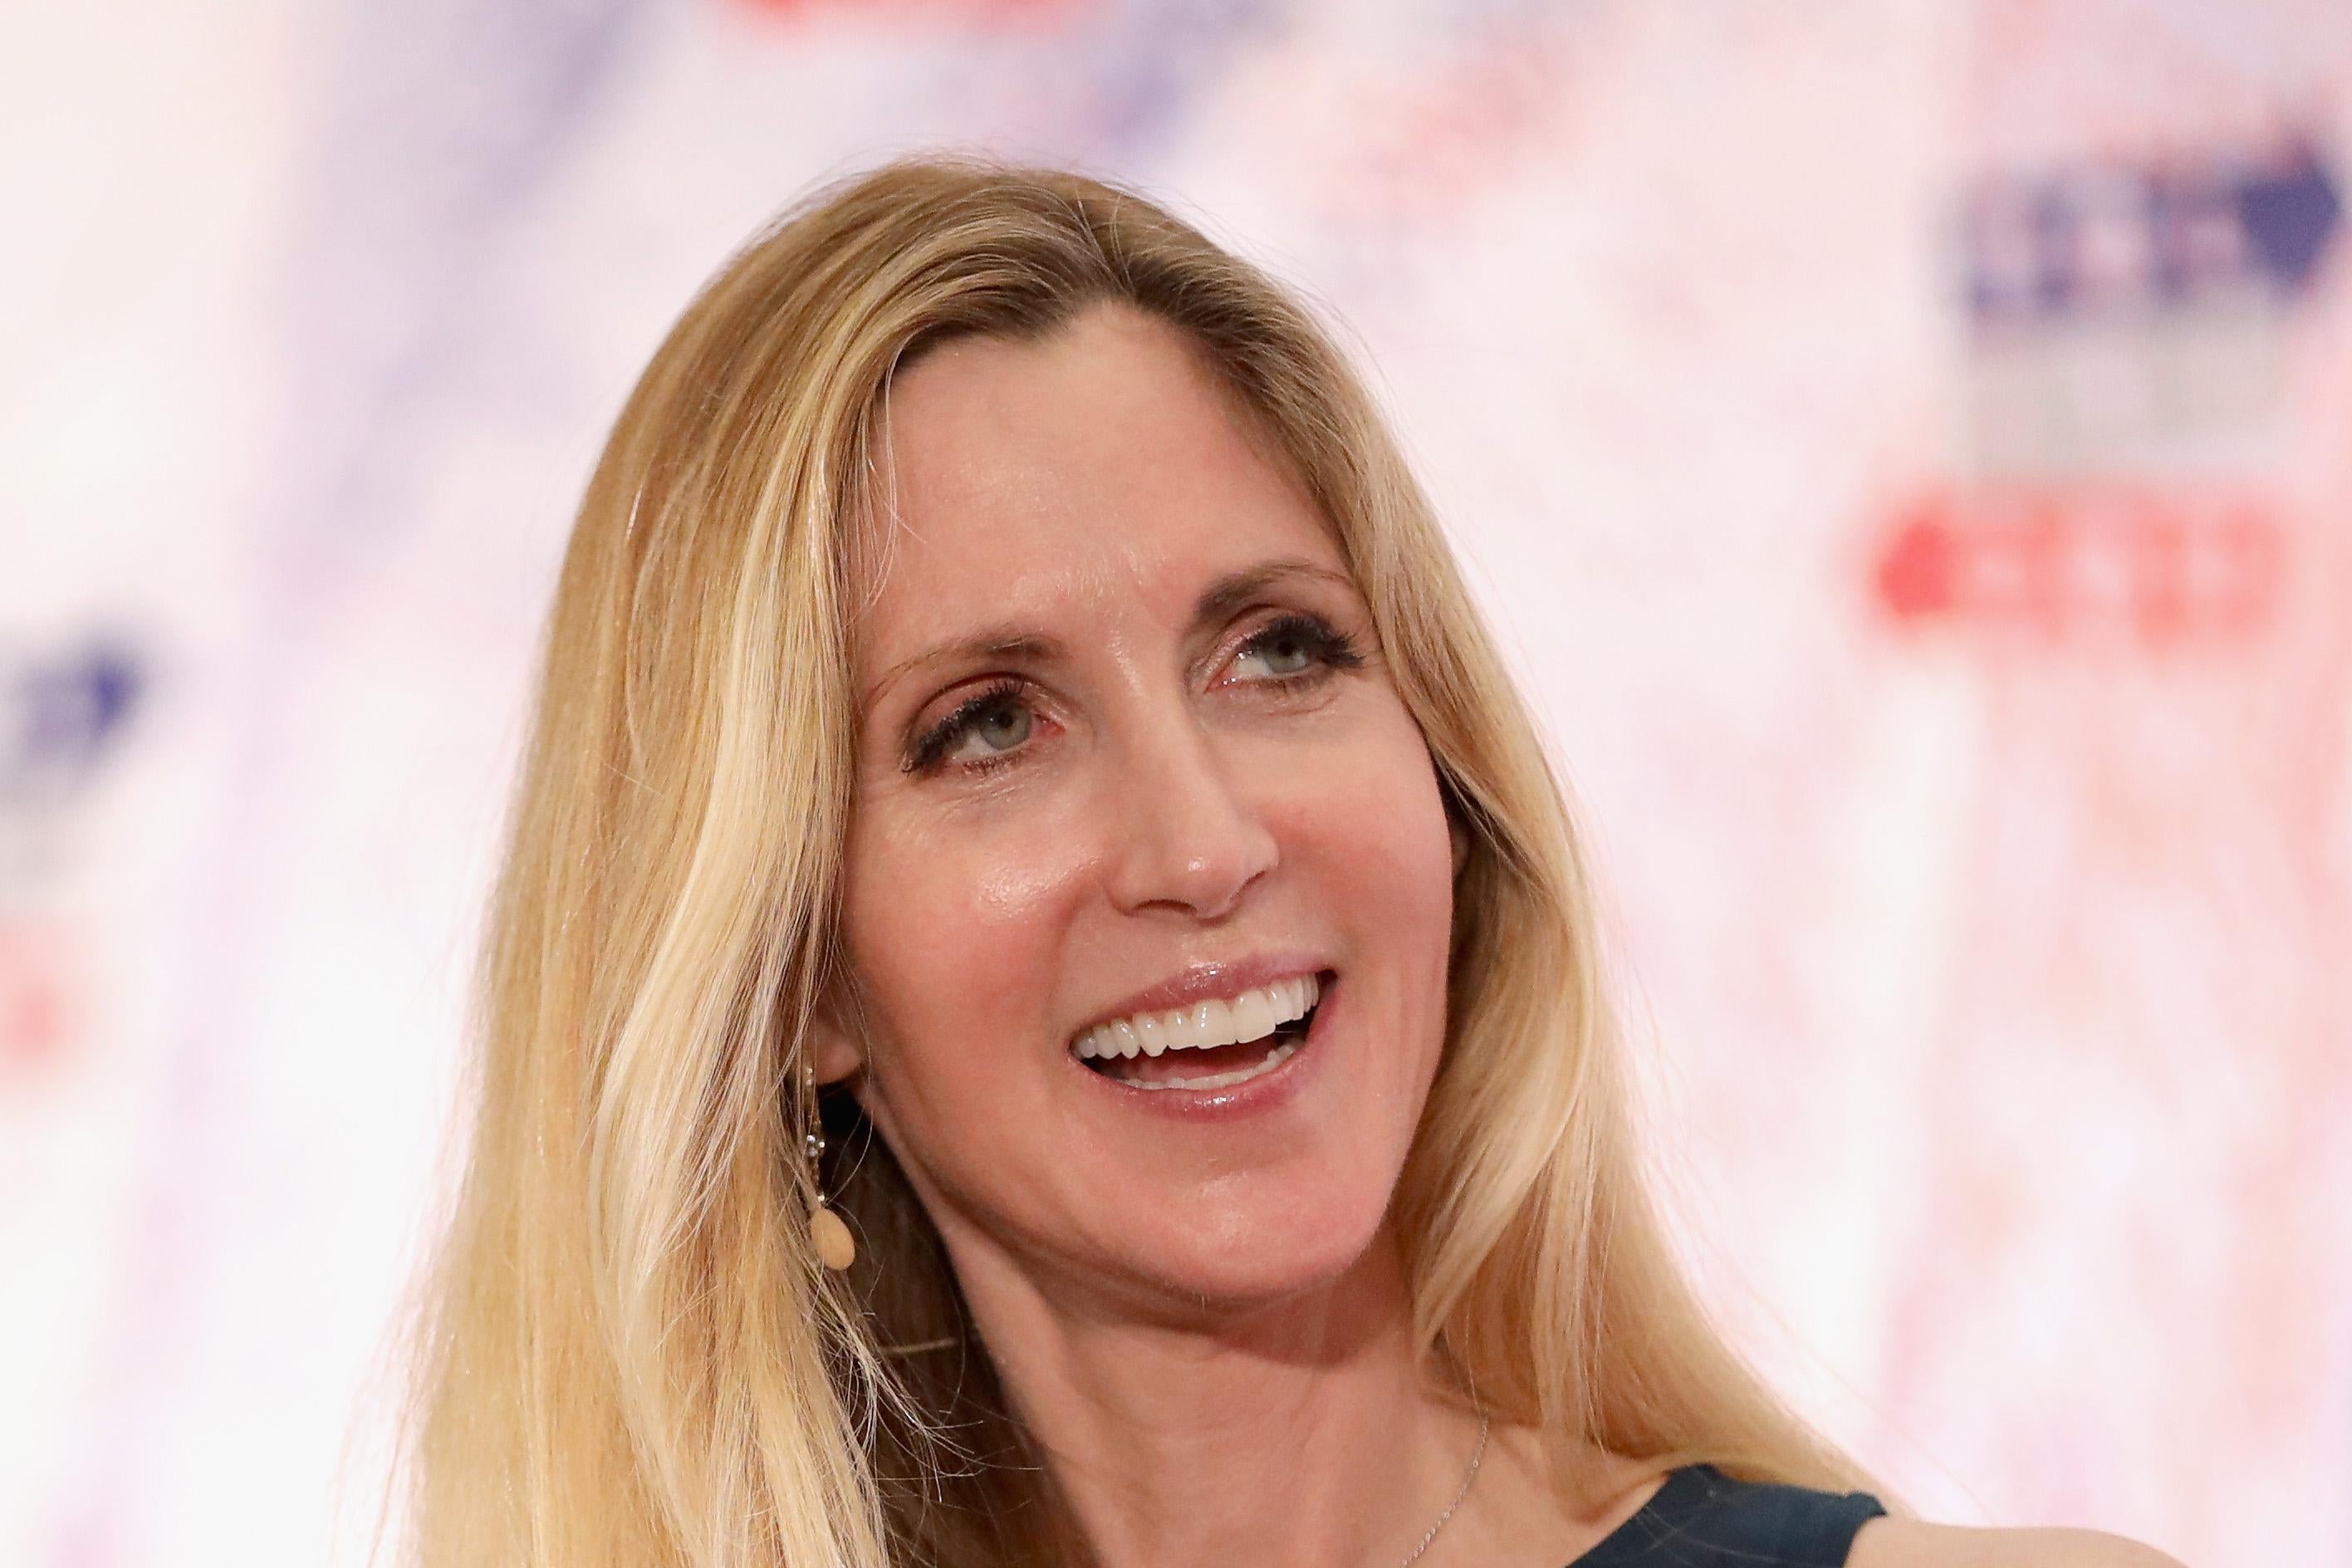 Ann Coulter smiles as she speaks onstage at a political convention.